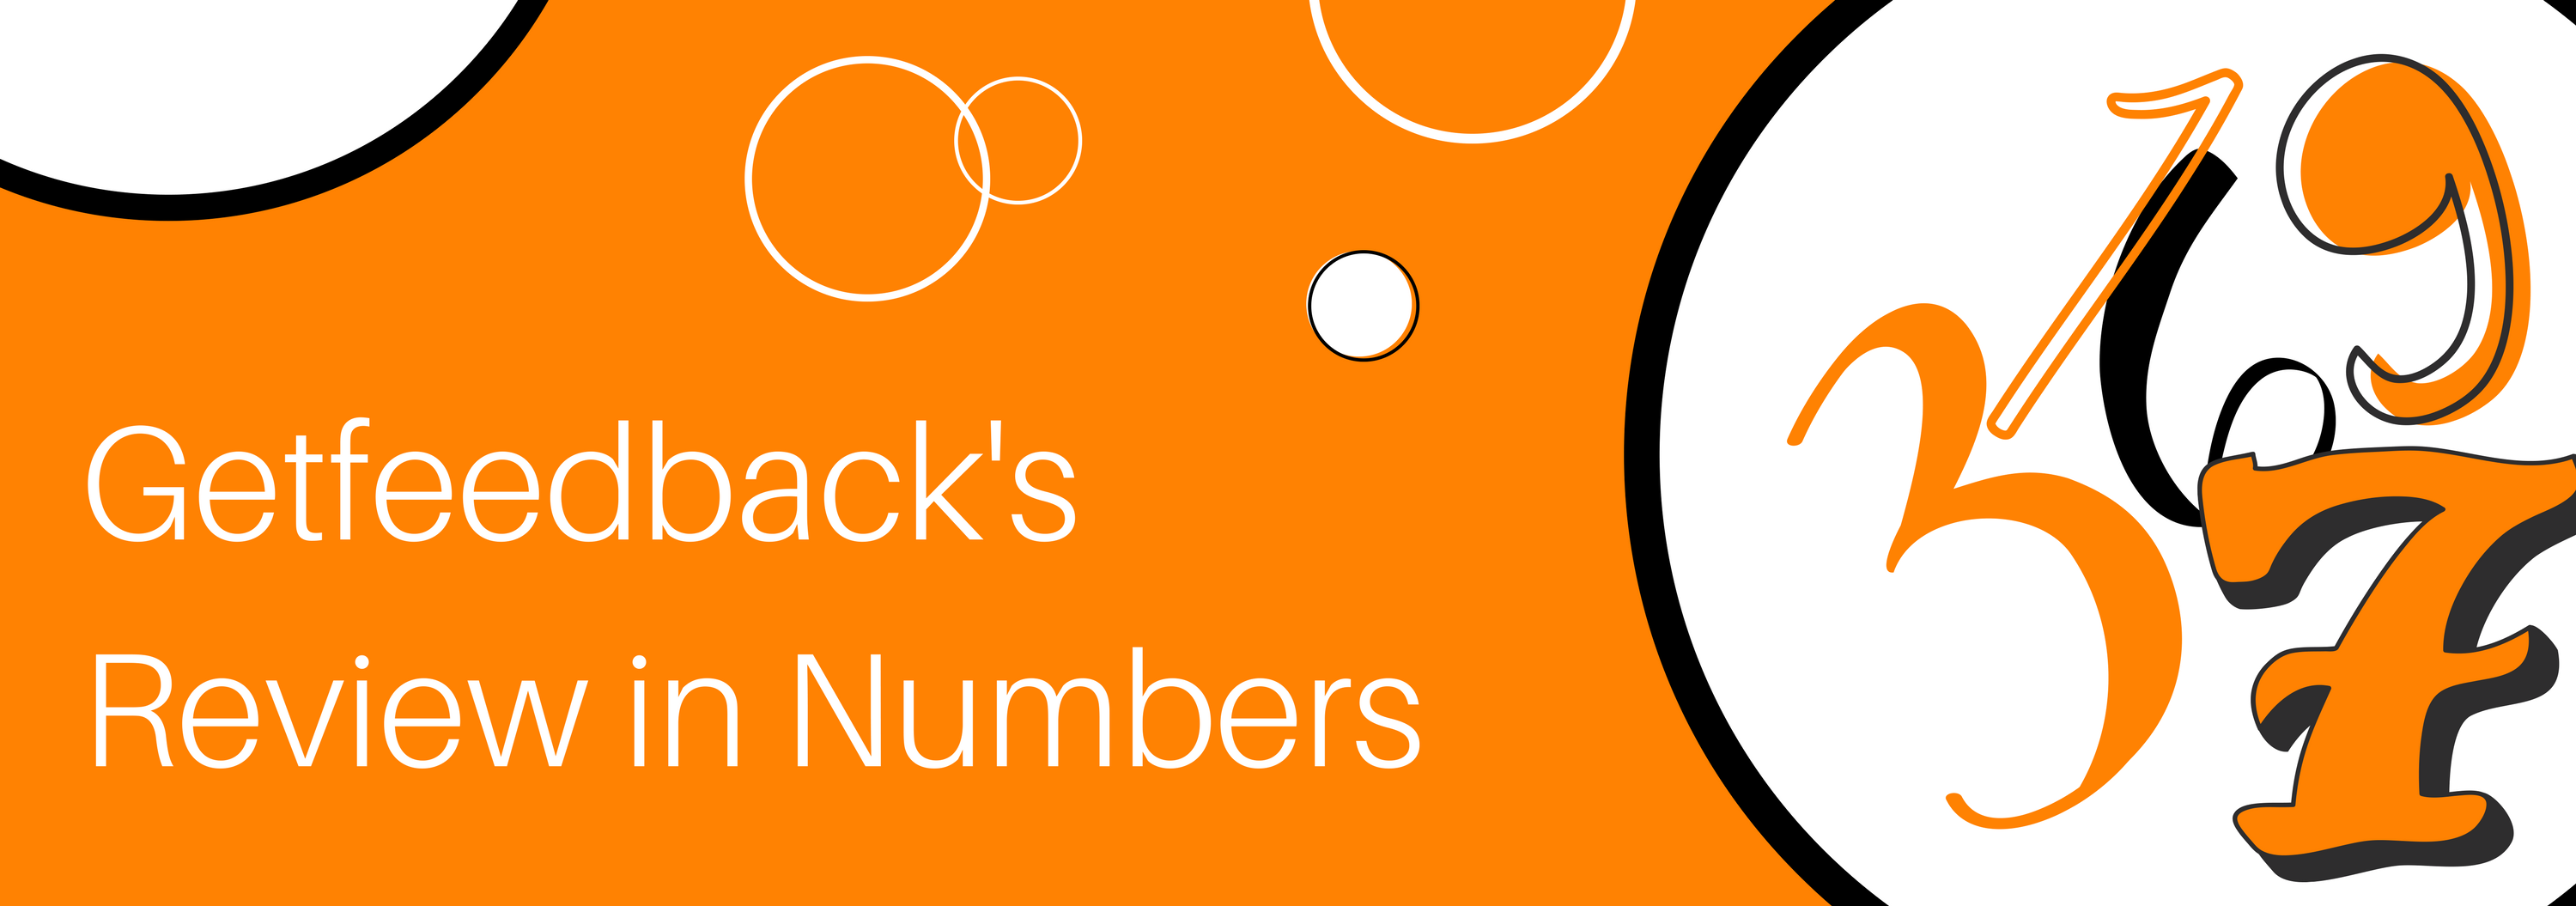 Getfeedback's Review in Numbers